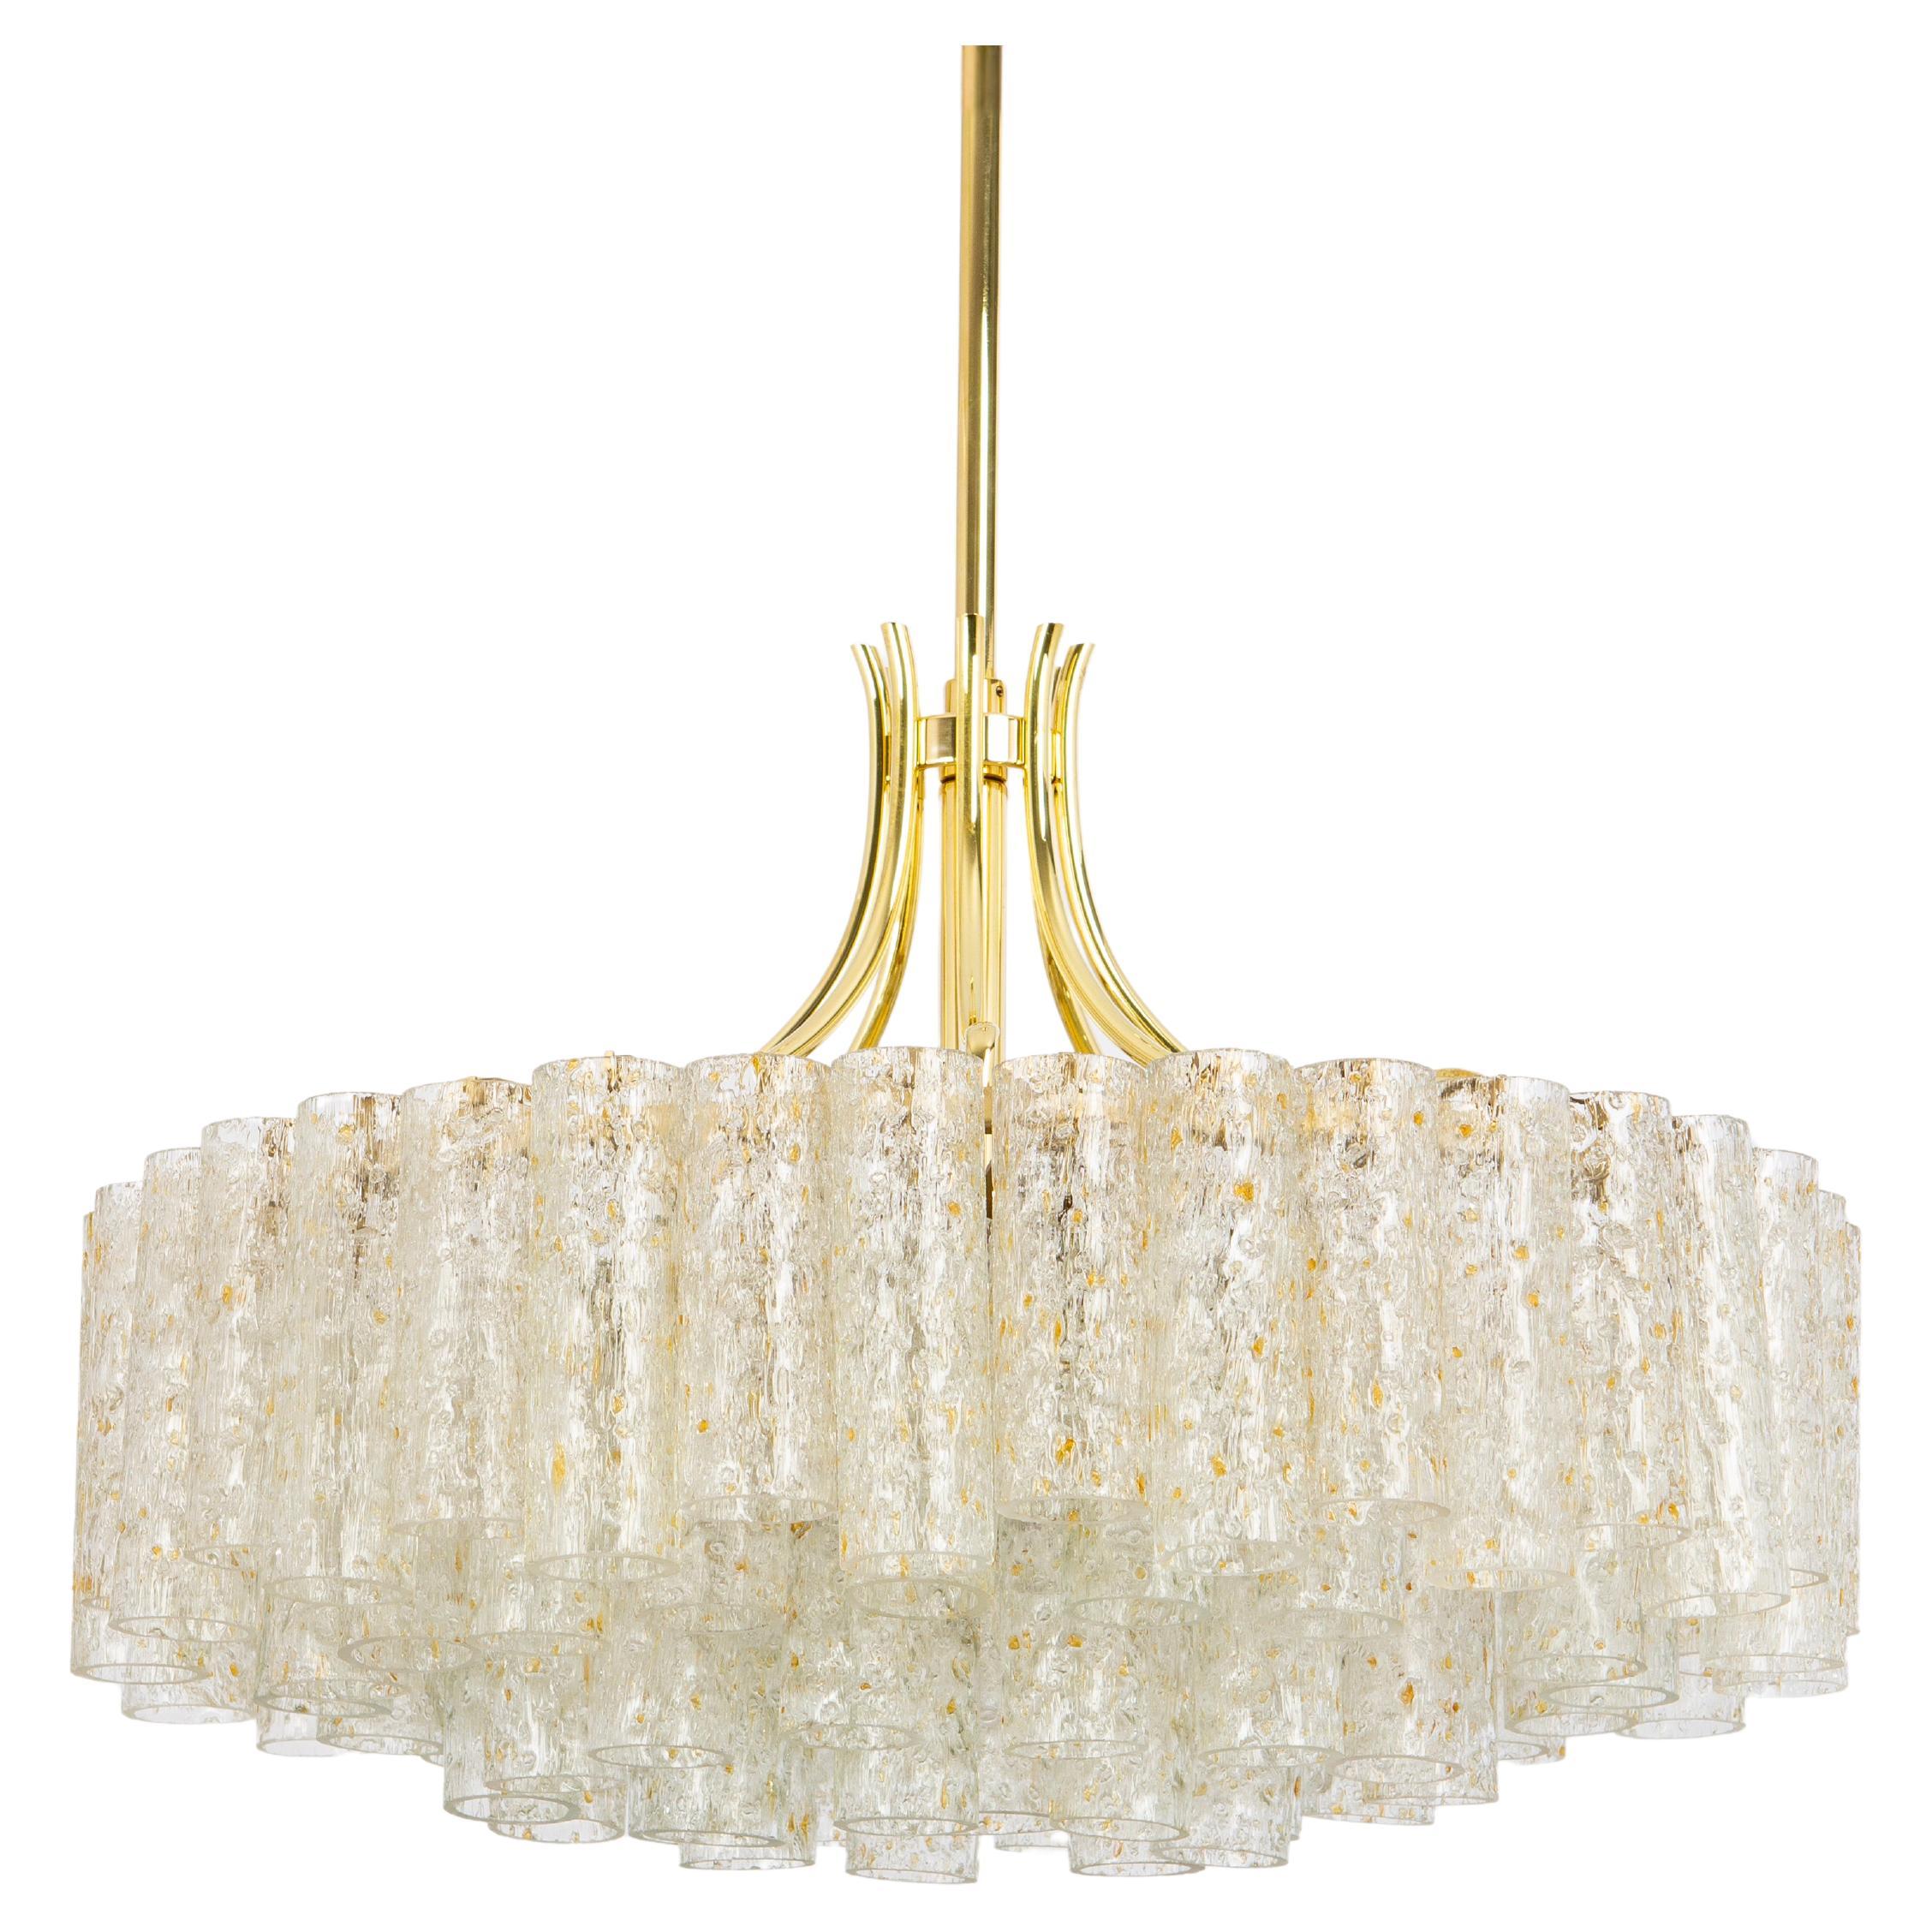 1 of 2 Stunning Large Doria Ice Glass Tubes Chandelier, Germany, 1960s For Sale